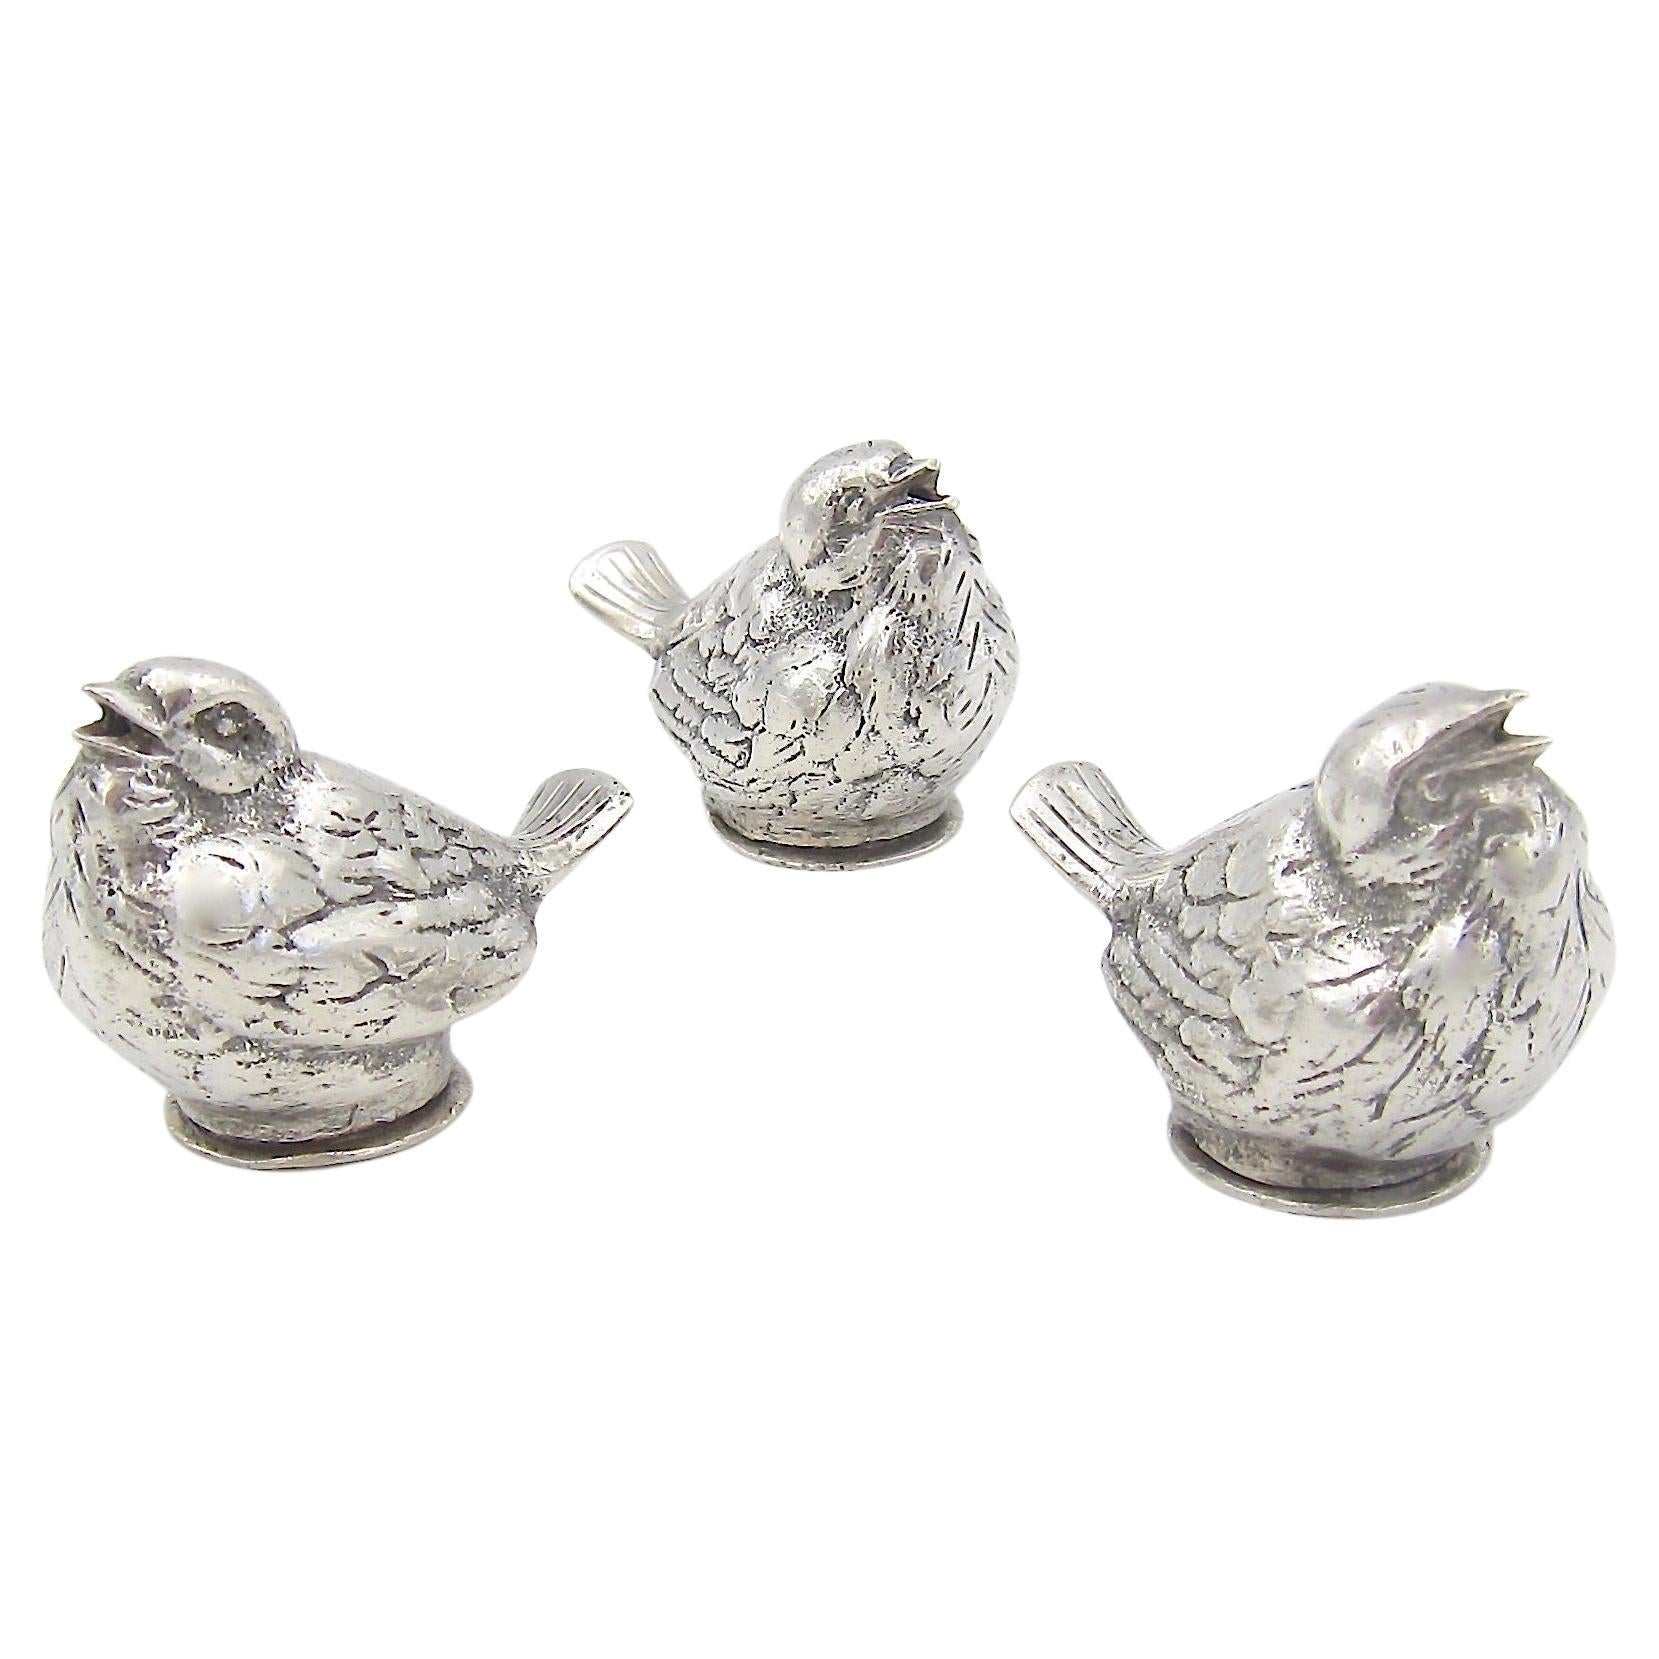 Antique Continental Novelty Bird Pepperette Shakers in 900 Silver